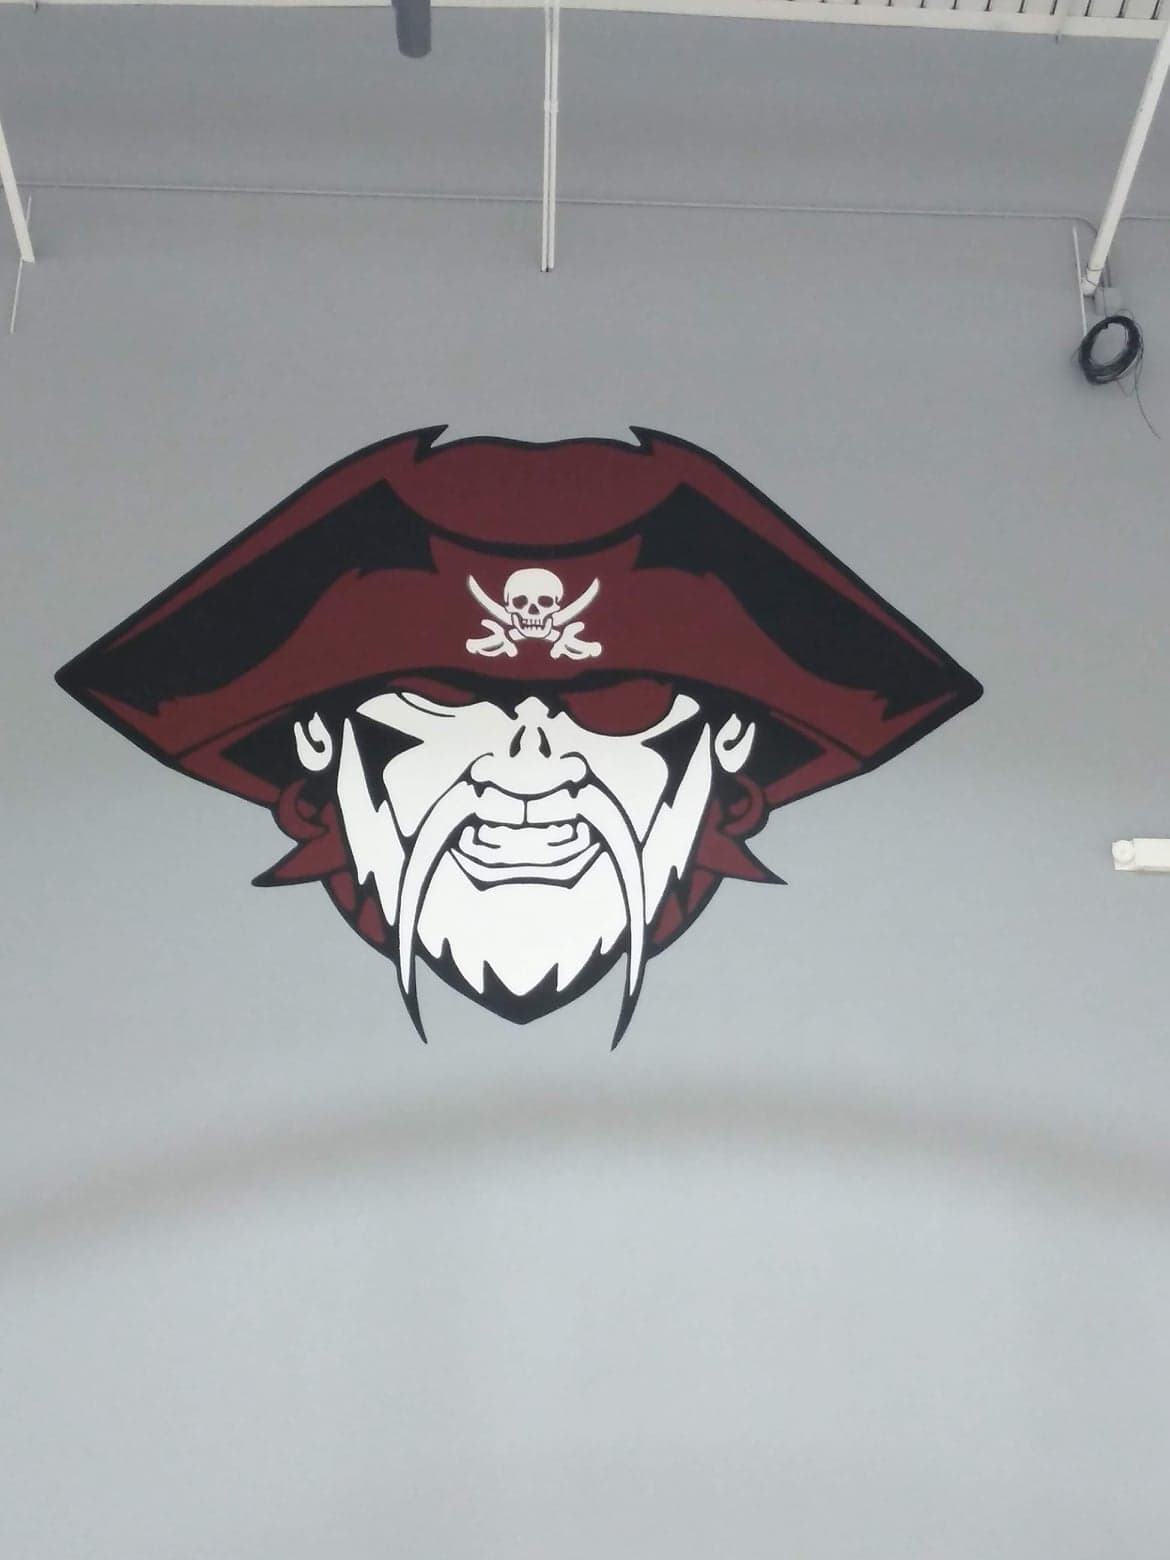 Murals we painted for the London Pirates in the School Gymnasium in Corpus Christi, Texas.